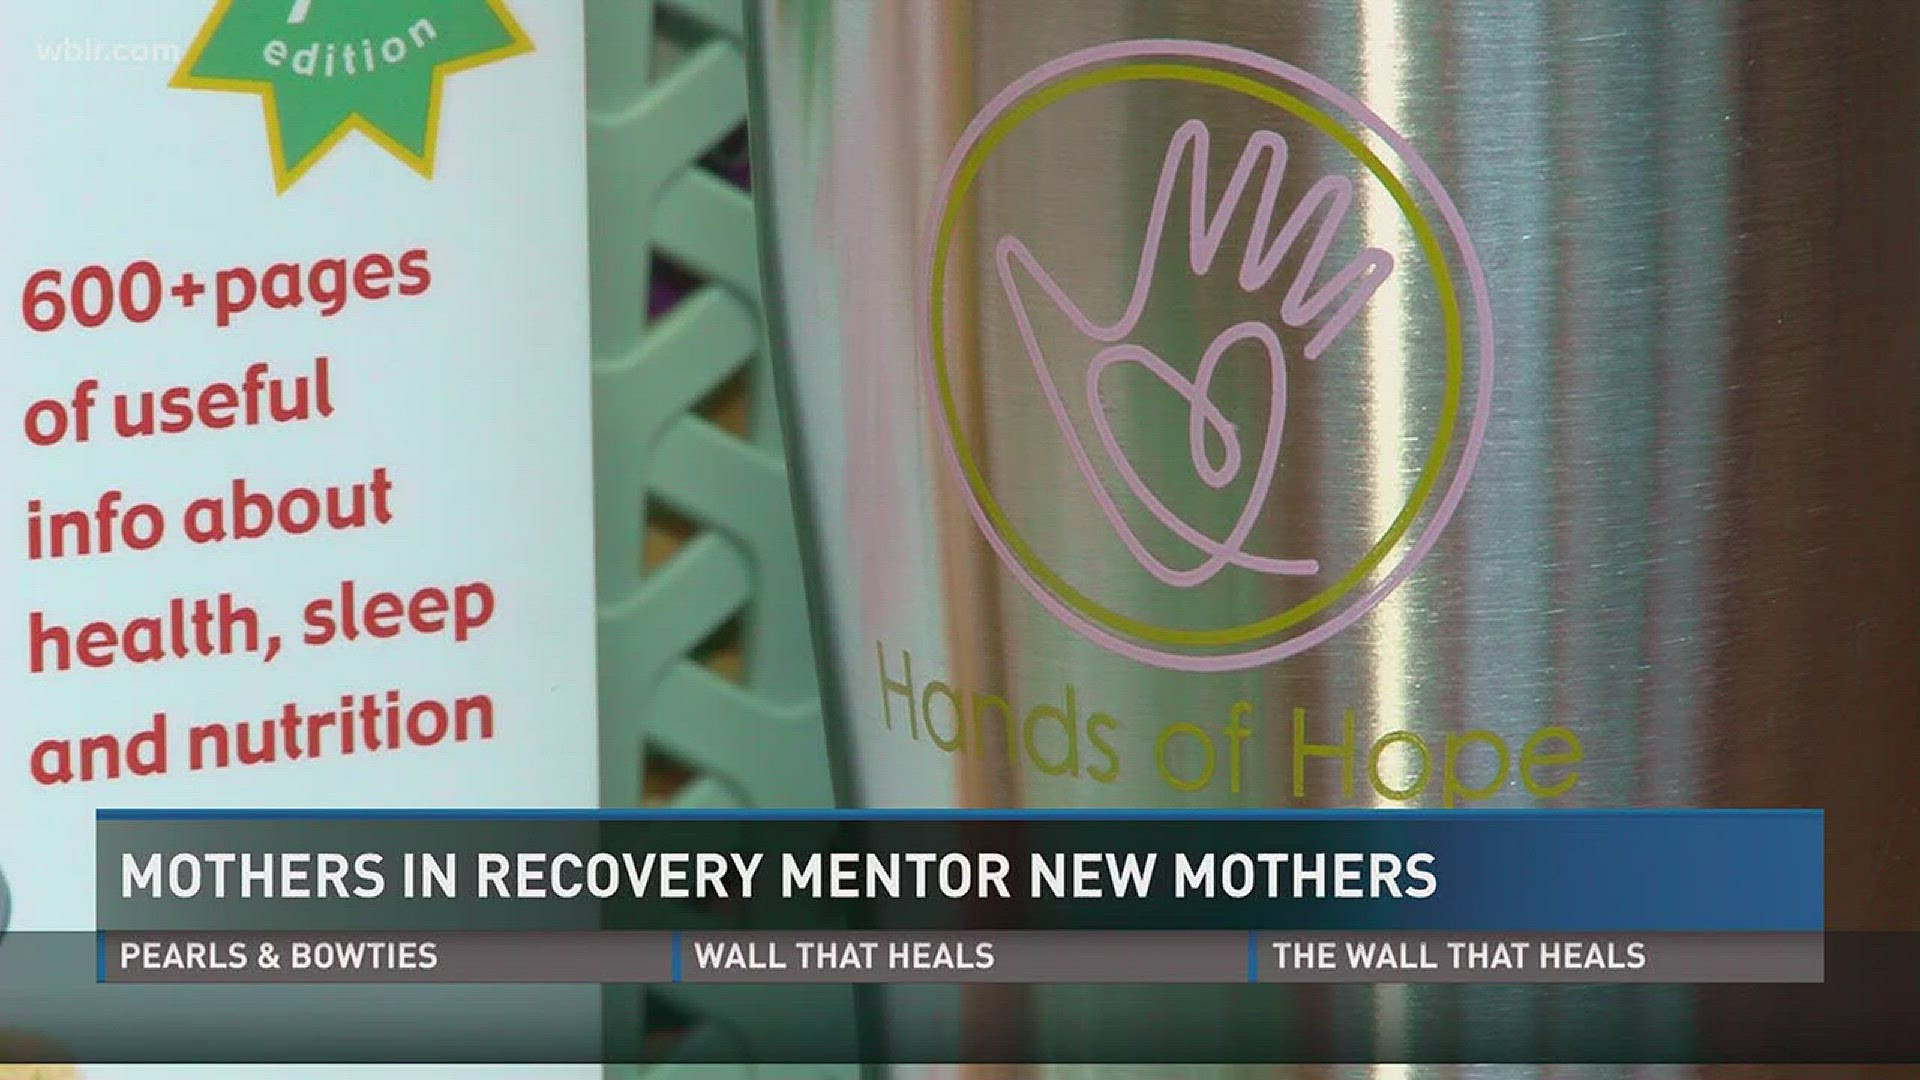 Oct. 5, 2017: In an effort to help mothers struggling with addiction, the Metro Drug Coalition is pairing women who have gone through similar situations through the Hands of Hope program.